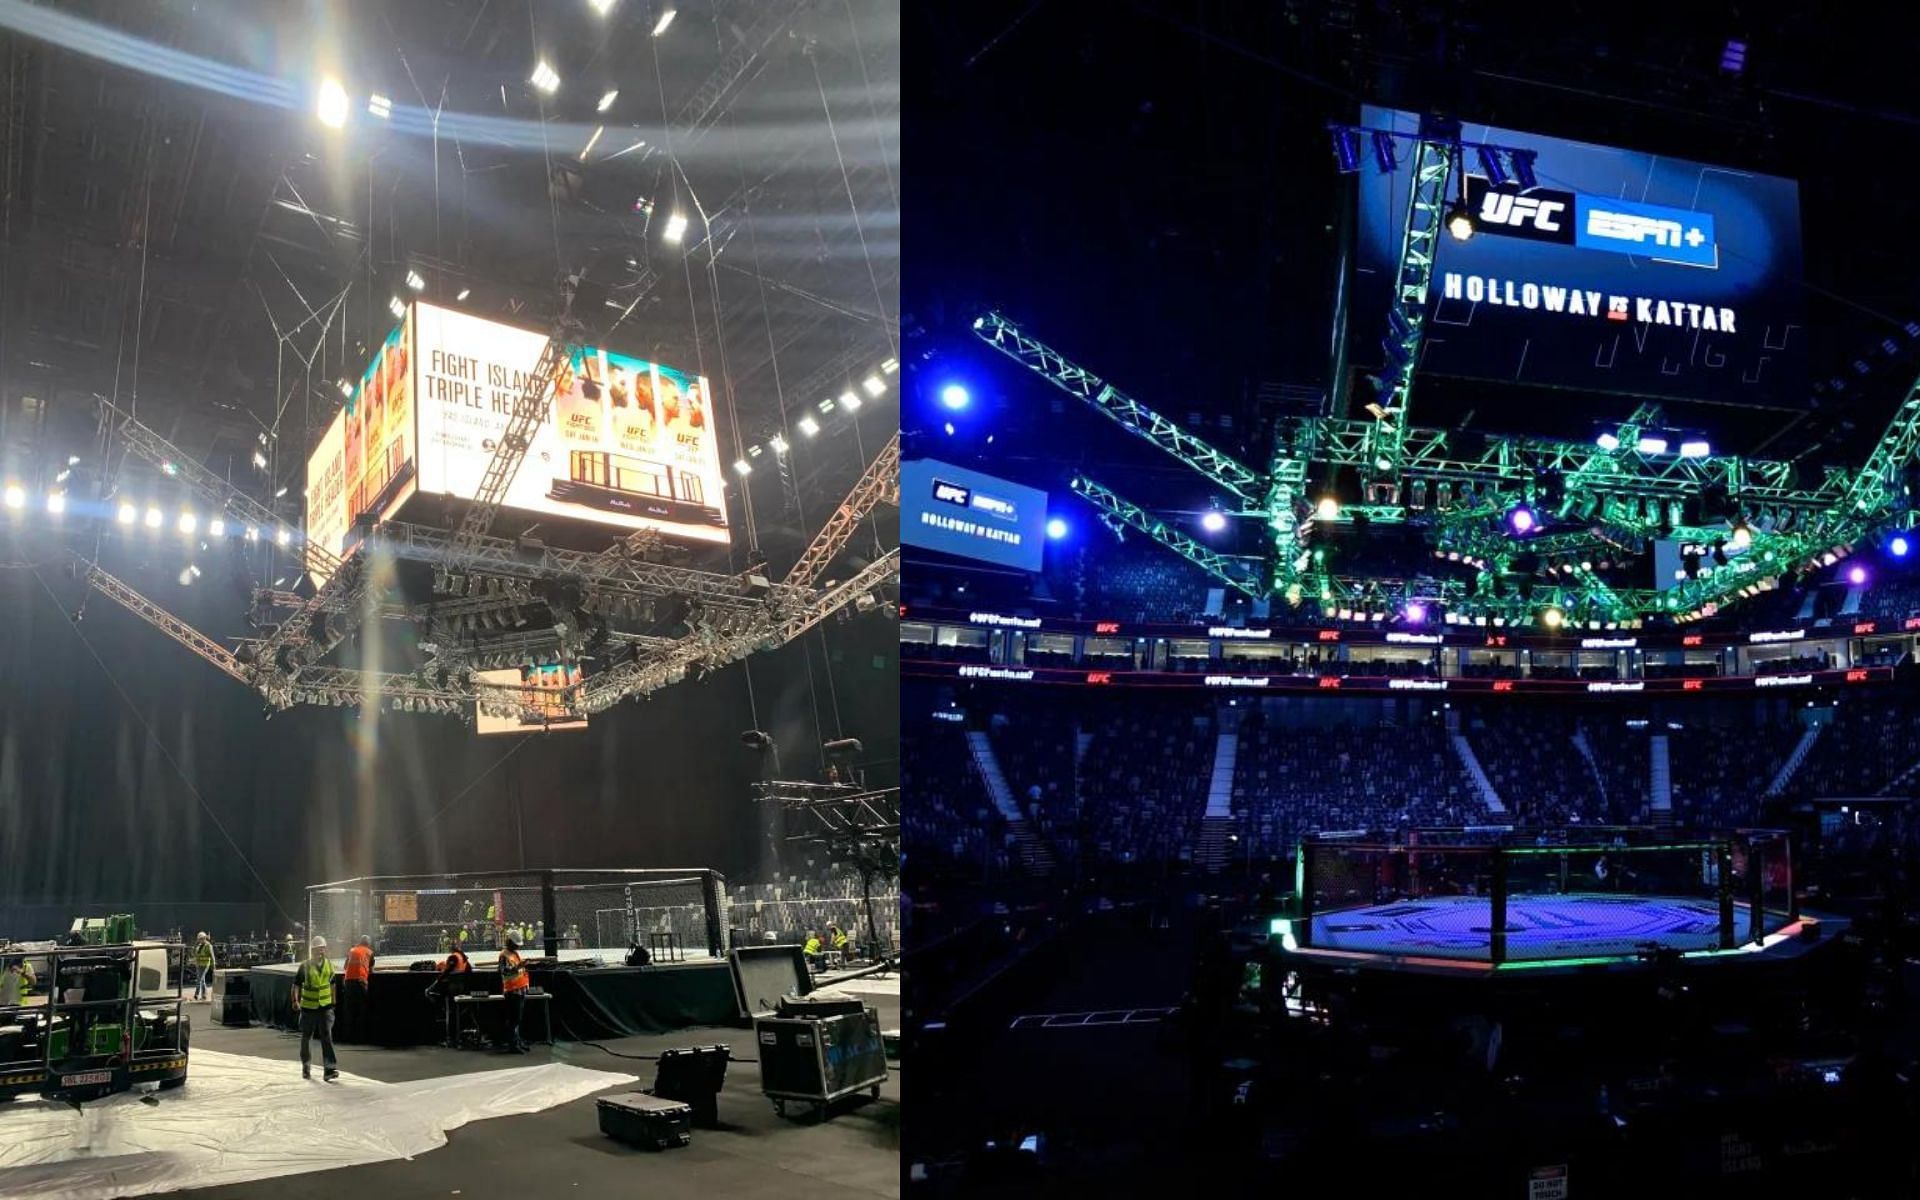 UFC Octagon being set up in the arena (image courtesy @Sun UK)